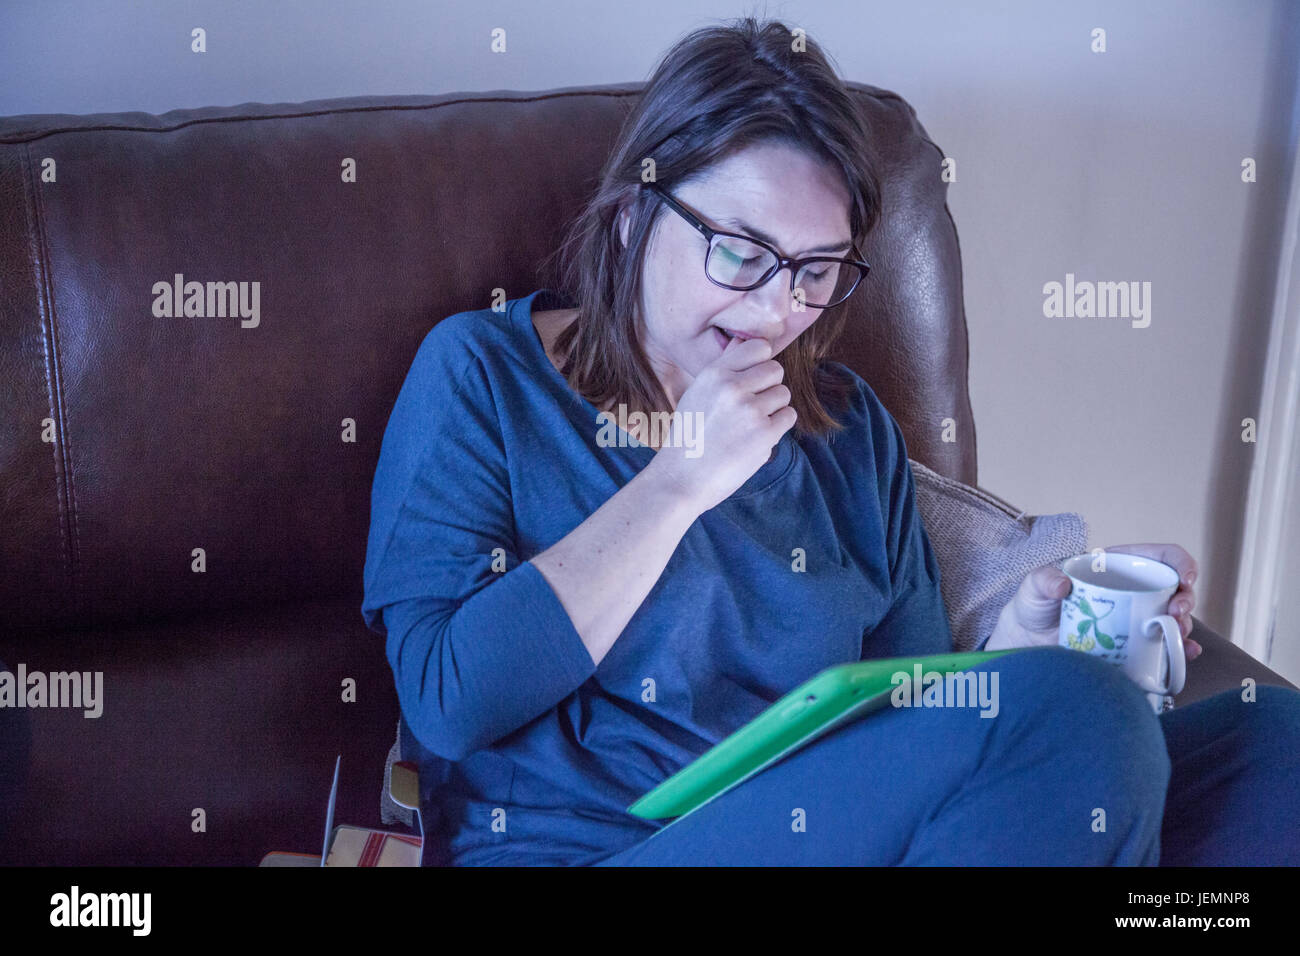 Woman sat on settee using her iPad and holding cup of coffee Stock Photo